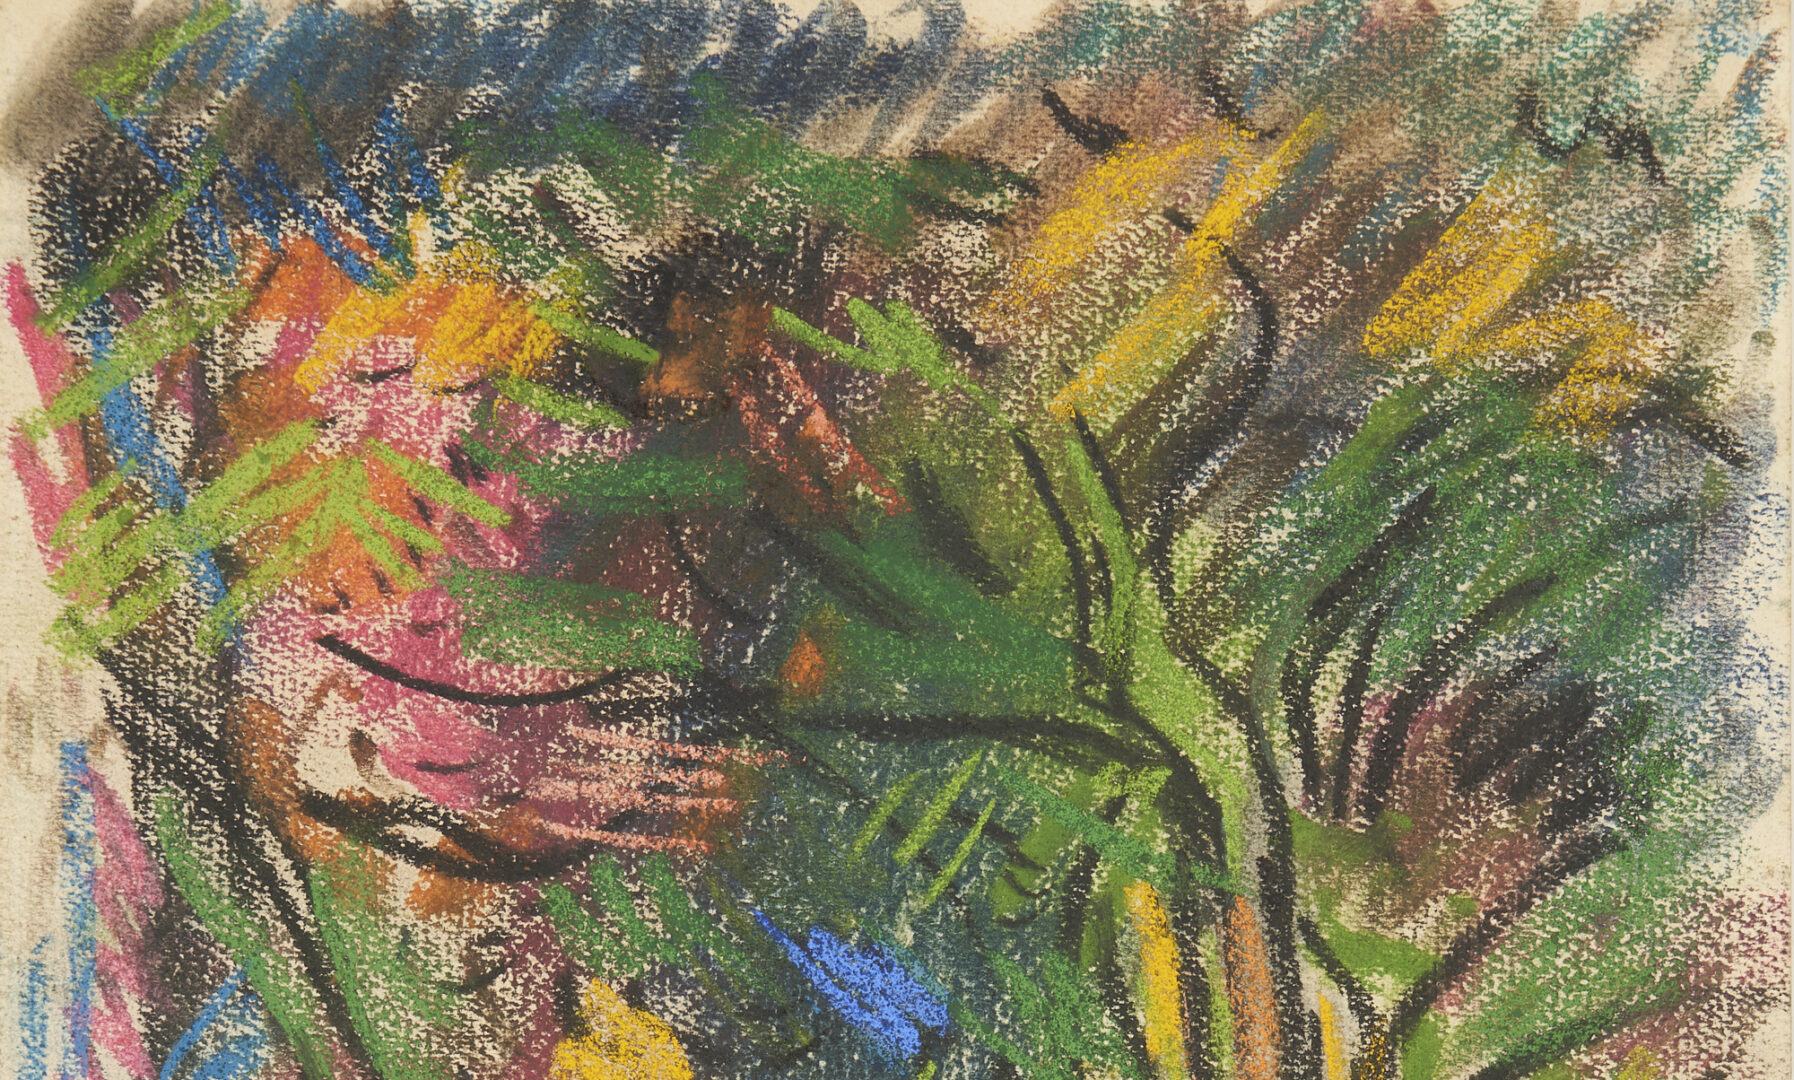 Lot 505: 2 Marjorie Johnson Lee Texas works on paper, Rhododendron & Leaves